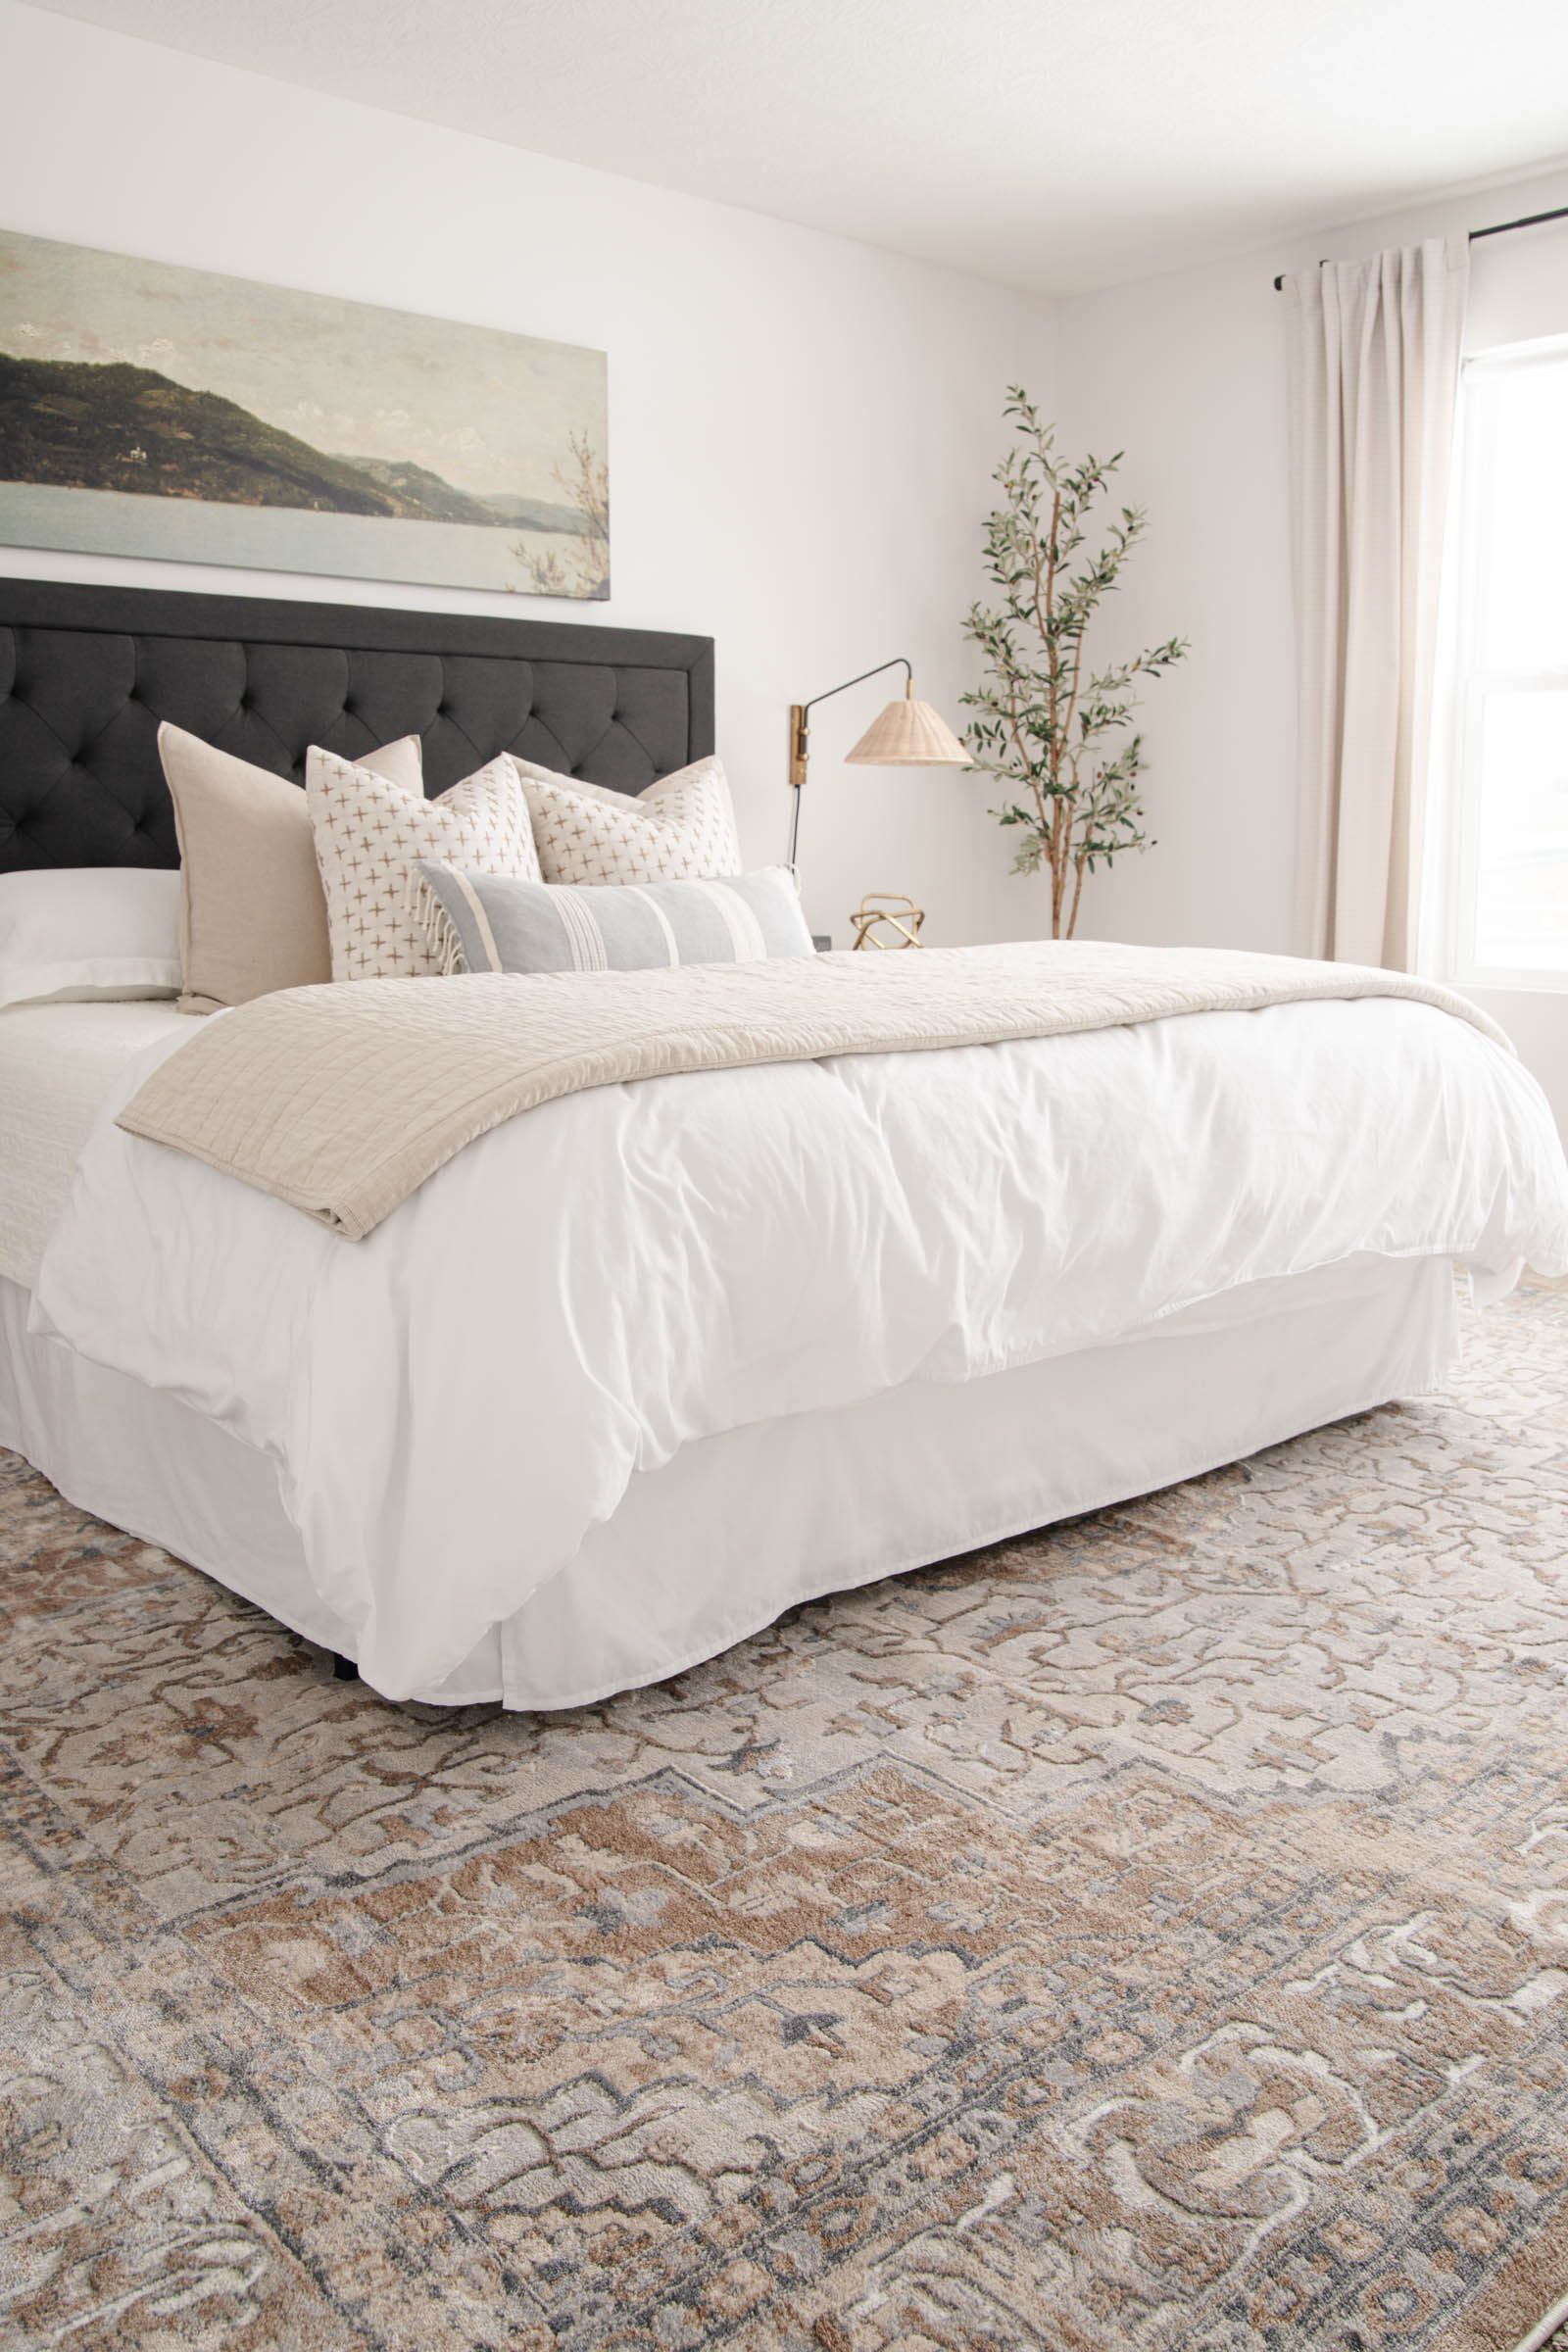 Choosing the Perfect Bedroom Rug: A
Comprehensive Guide